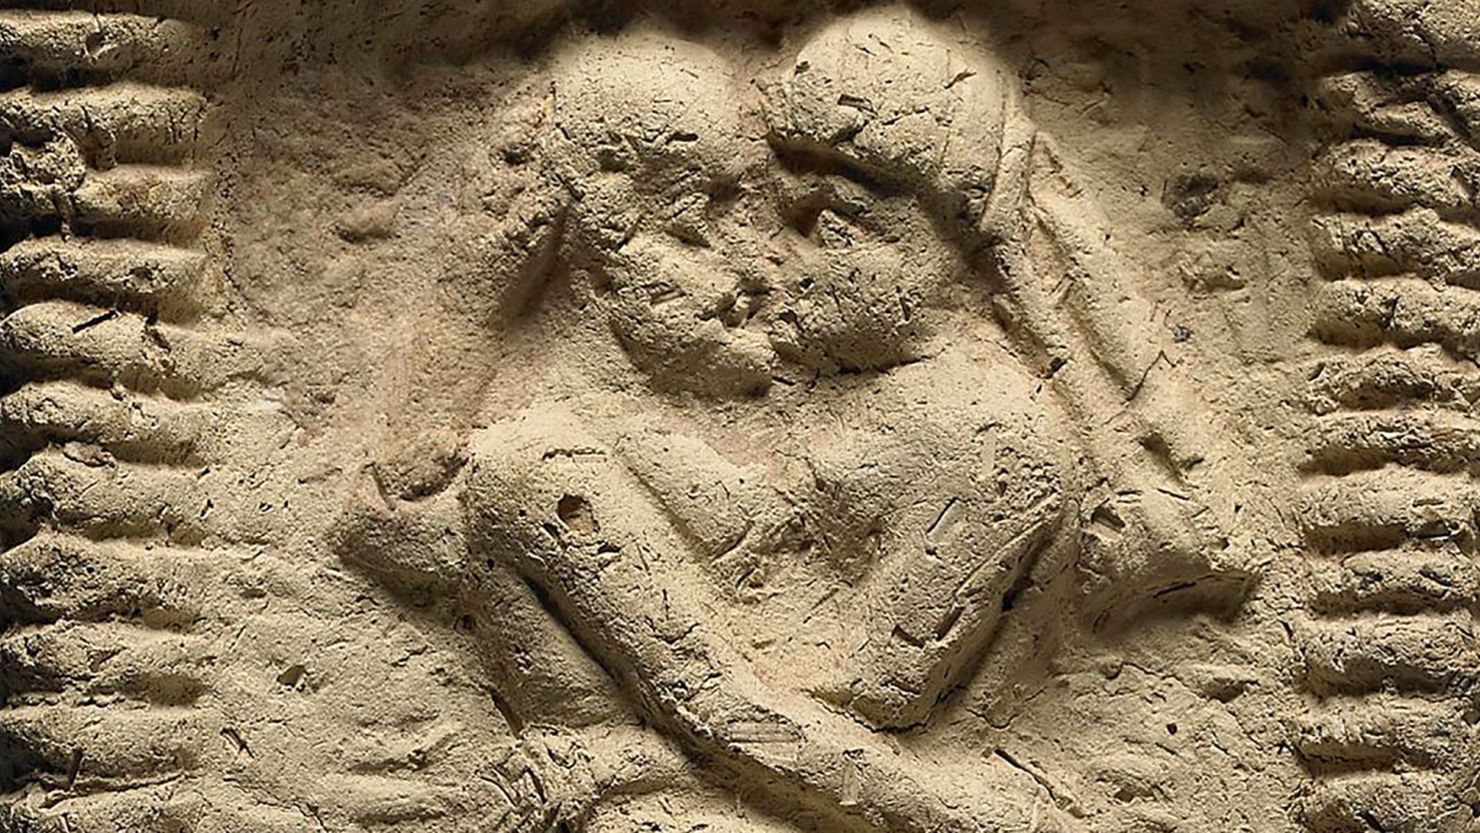 A clay model from Mesopotamia dating to 1800 BC shows a nude couple intertwined on a bed, engaged in sex and kissing.